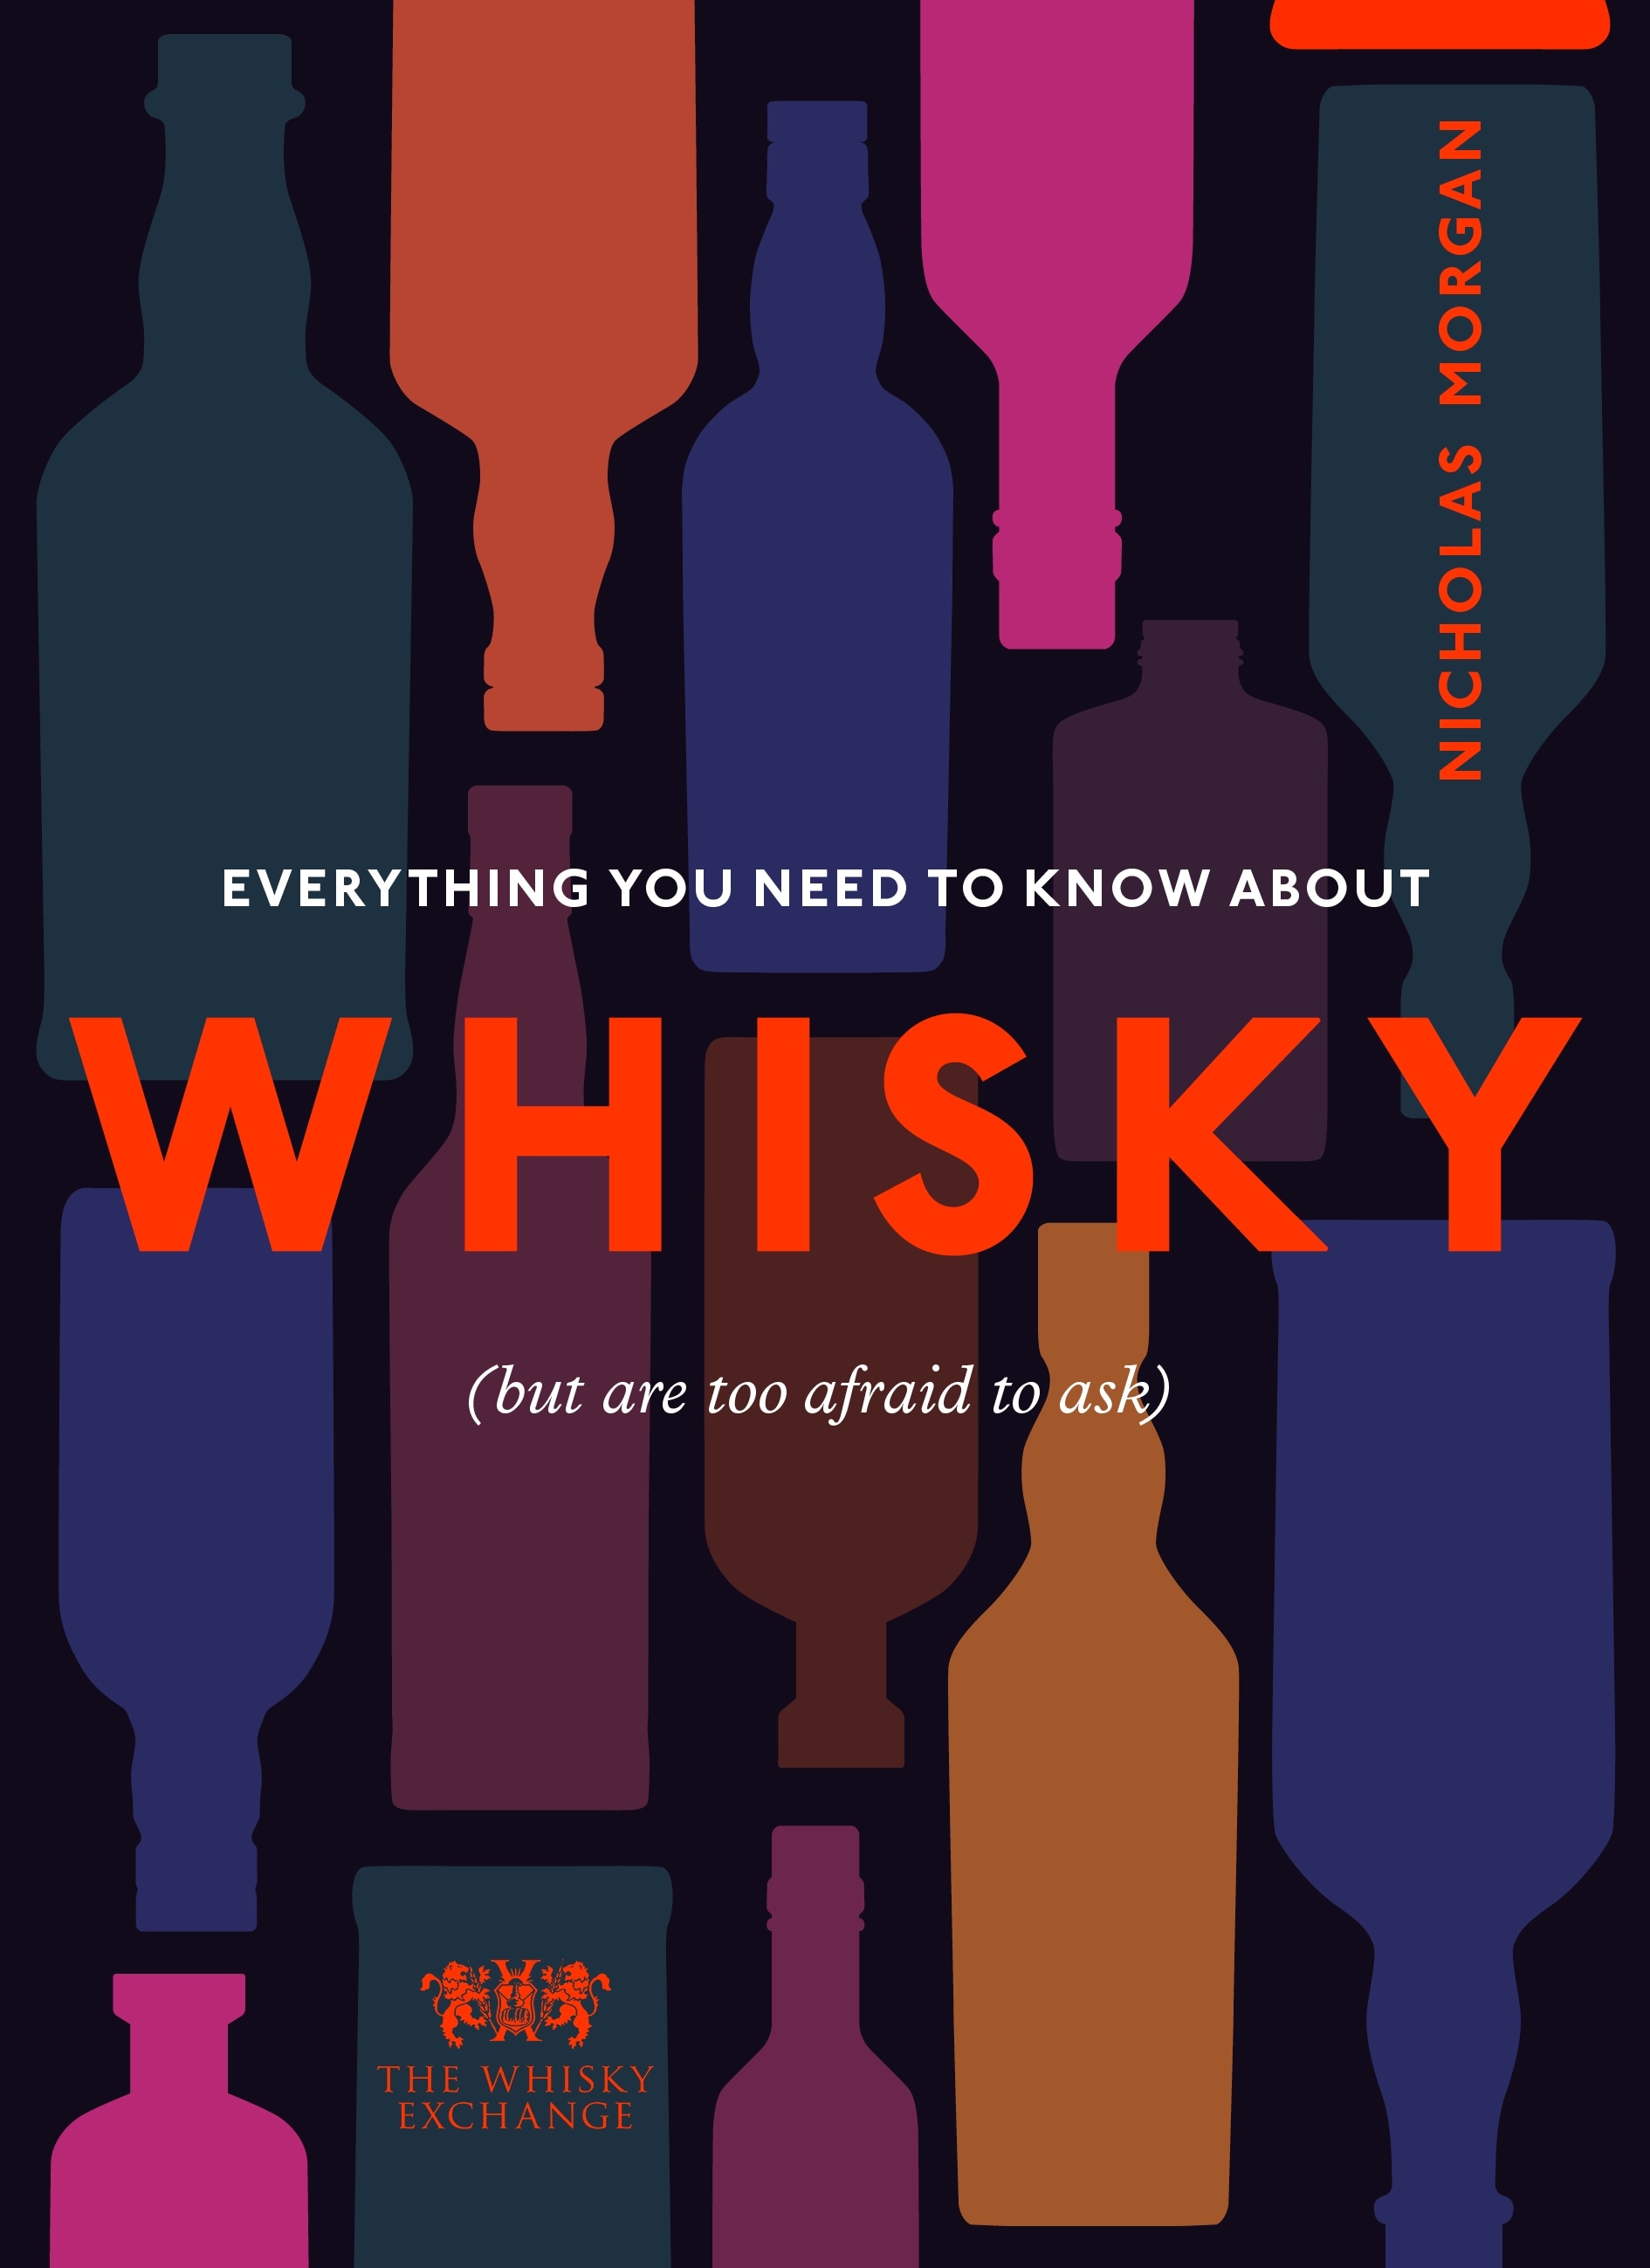 Book “Everything You Need to Know About Whisky” by Nick Morgan, The Whisky Exchange — September 16, 2021